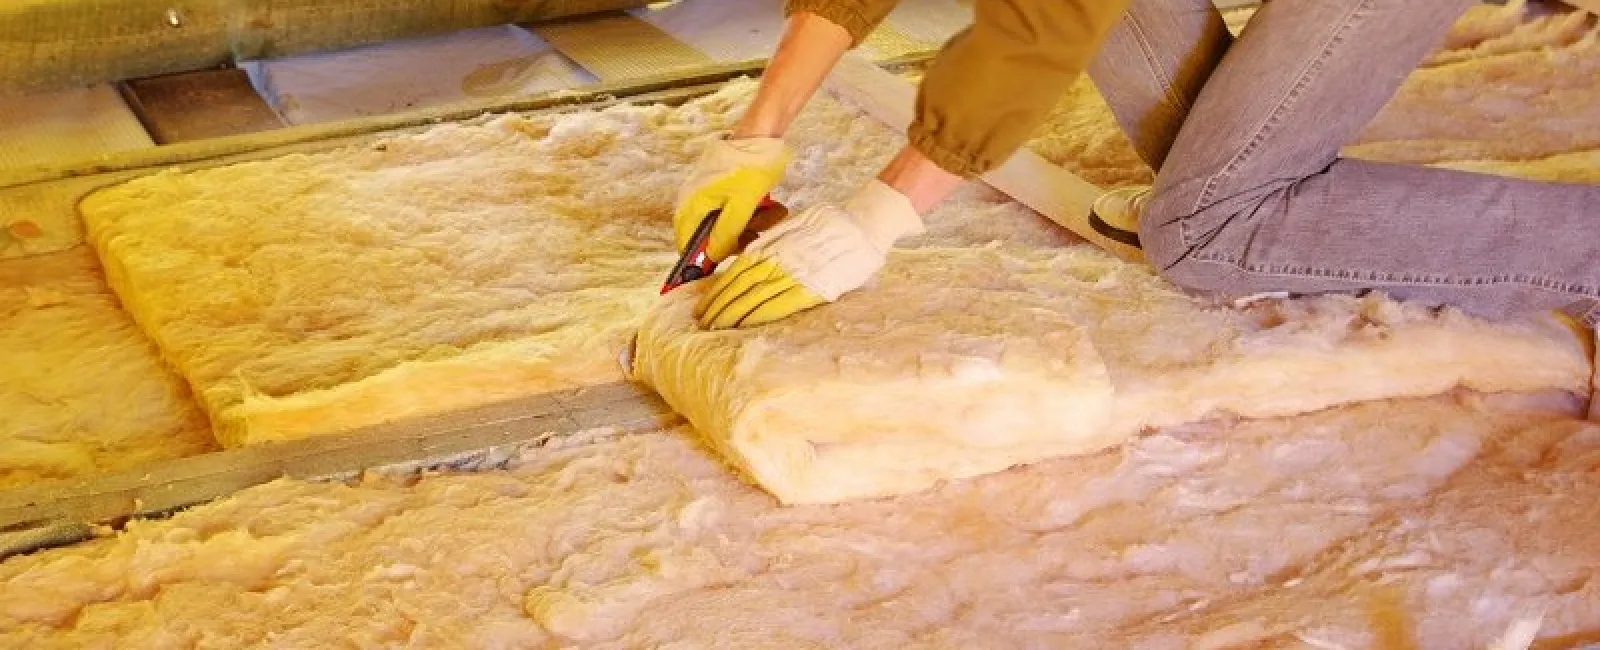 4 Interesting Facts about Attic Insulation